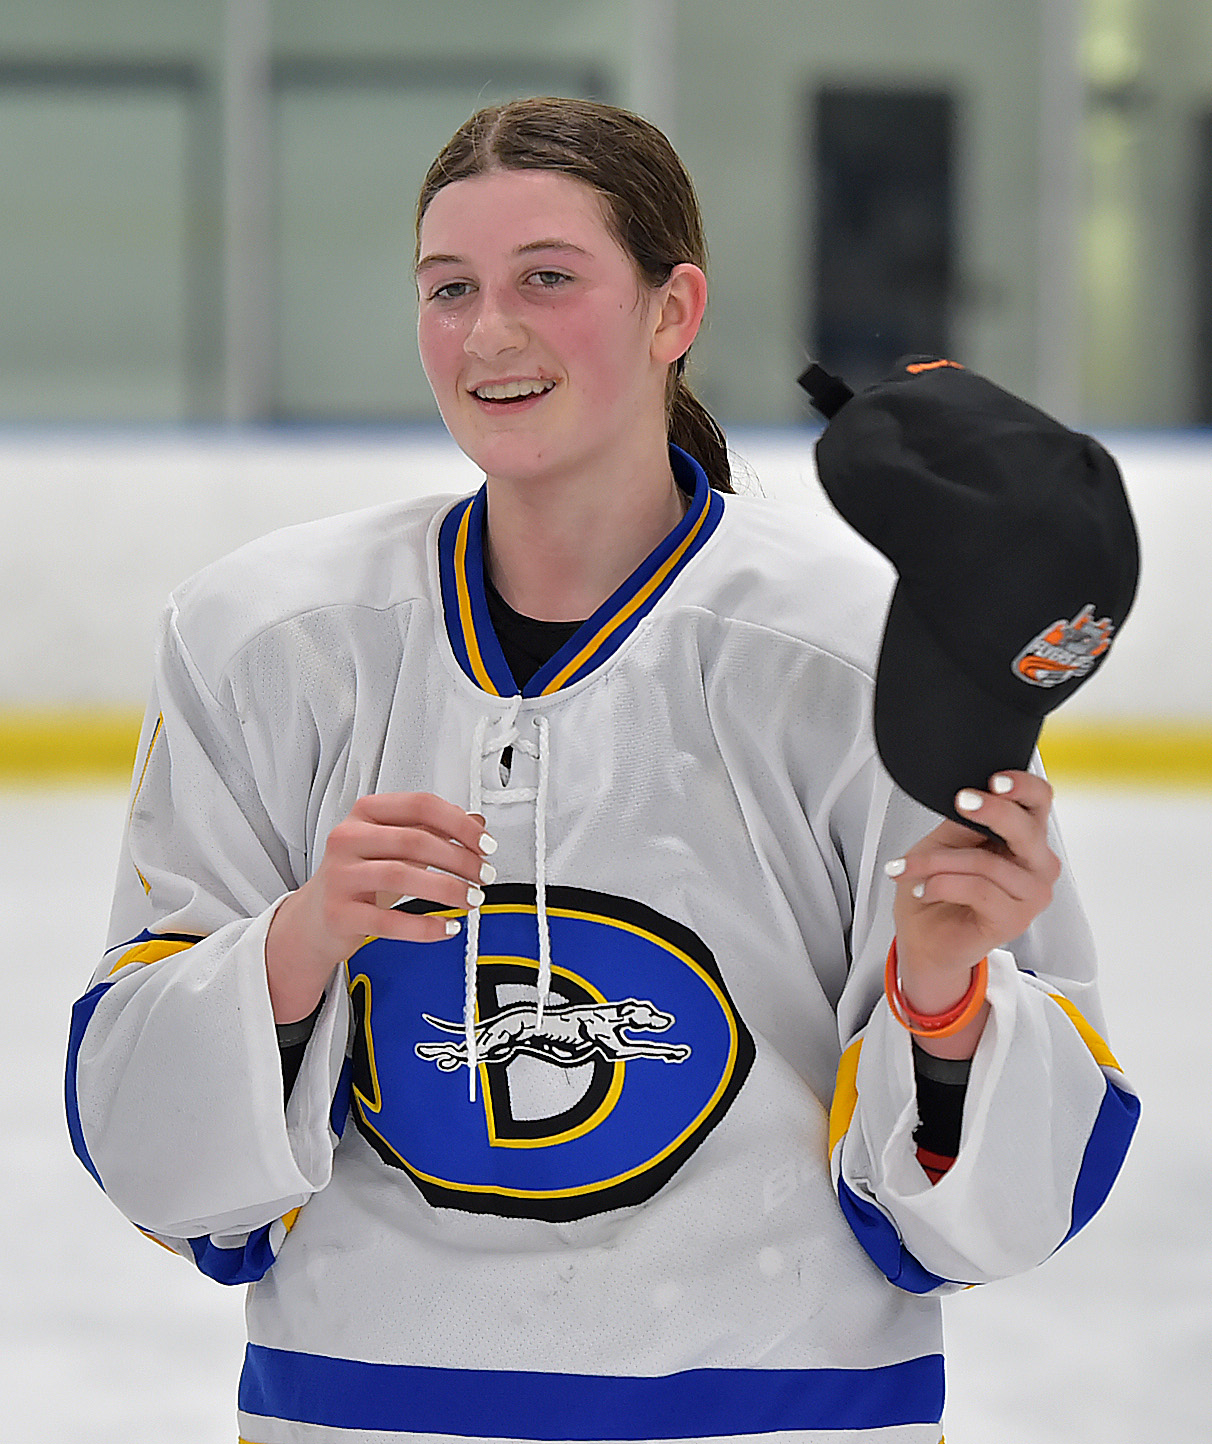 Thomas masterful performance leads Downingtown West to Flyers Cup title